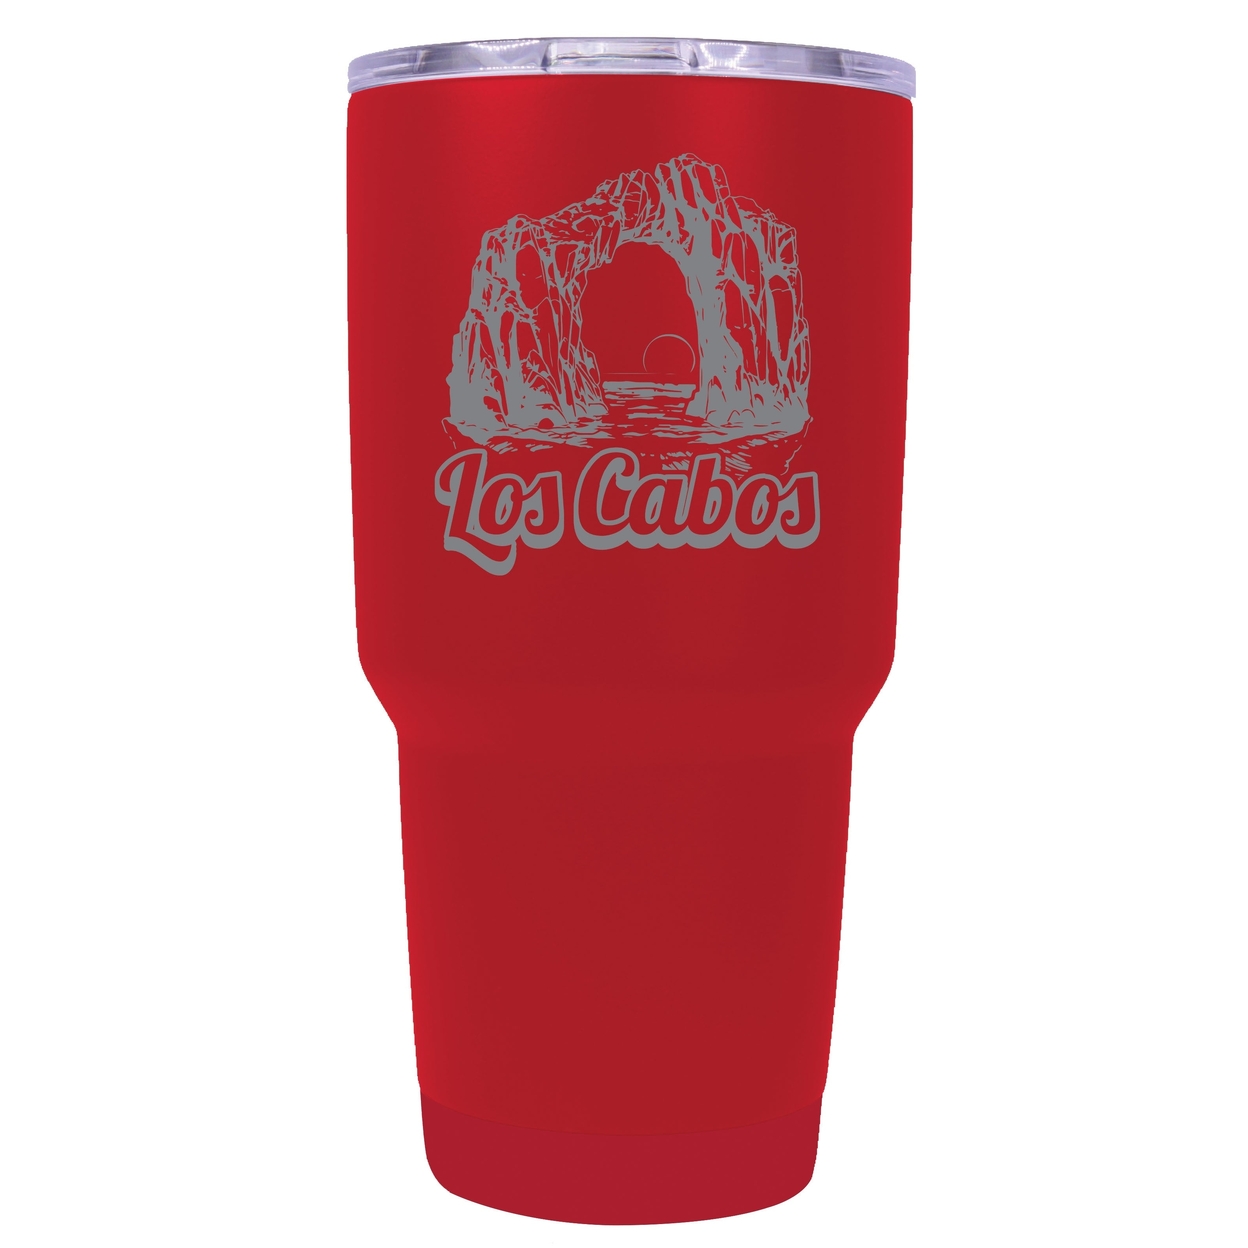 Los Cabos Mexico Souvenir 24 Oz Engraved Insulated Stainless Steel Tumbler - Seafoam,,2-Pack